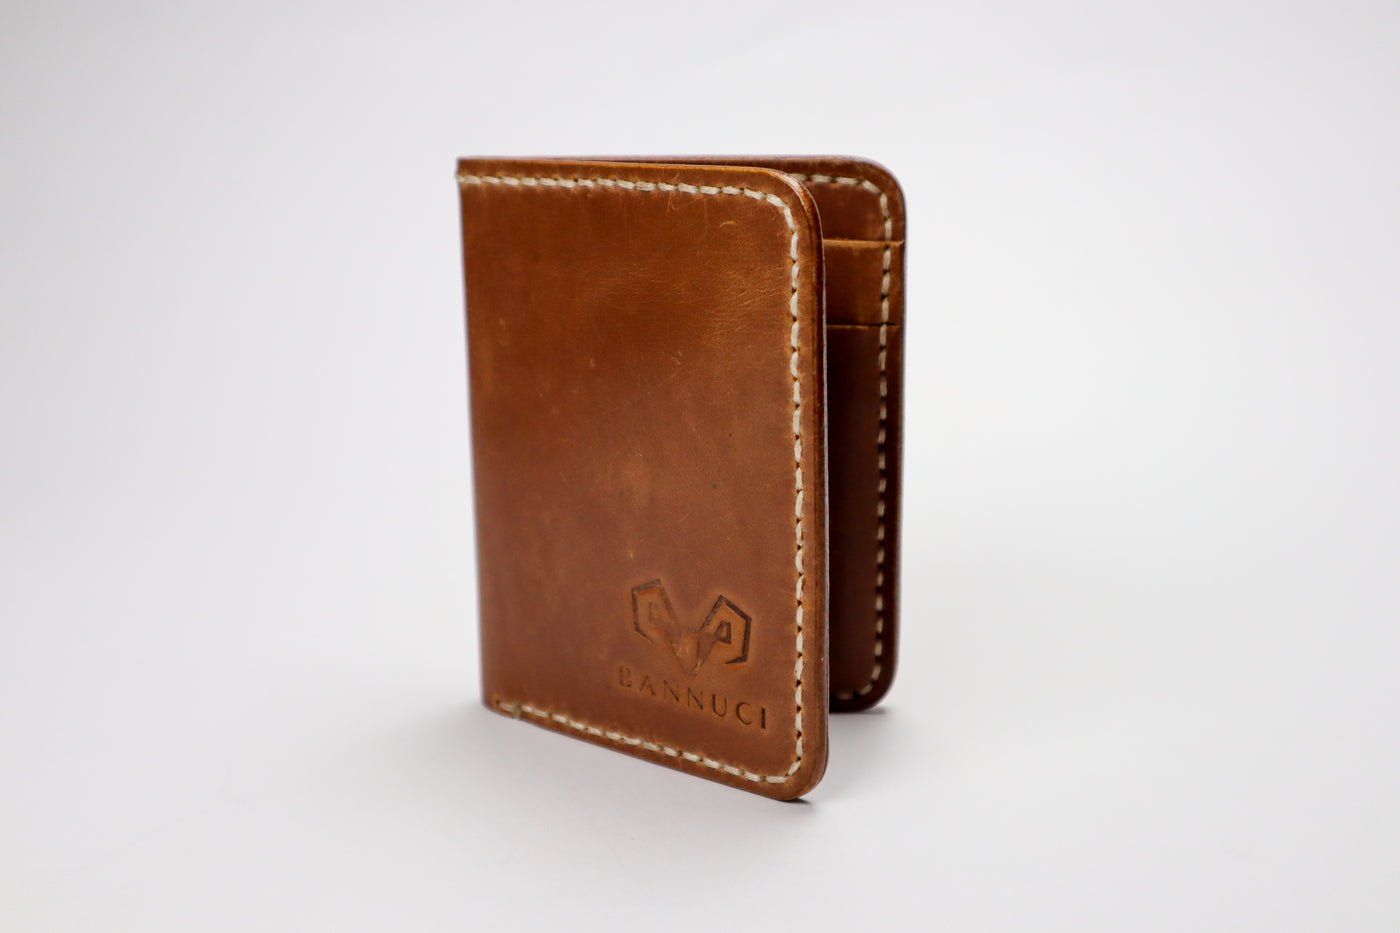 Premium Quality Tan Brown Vertical Leather Card Holder by Bannuci